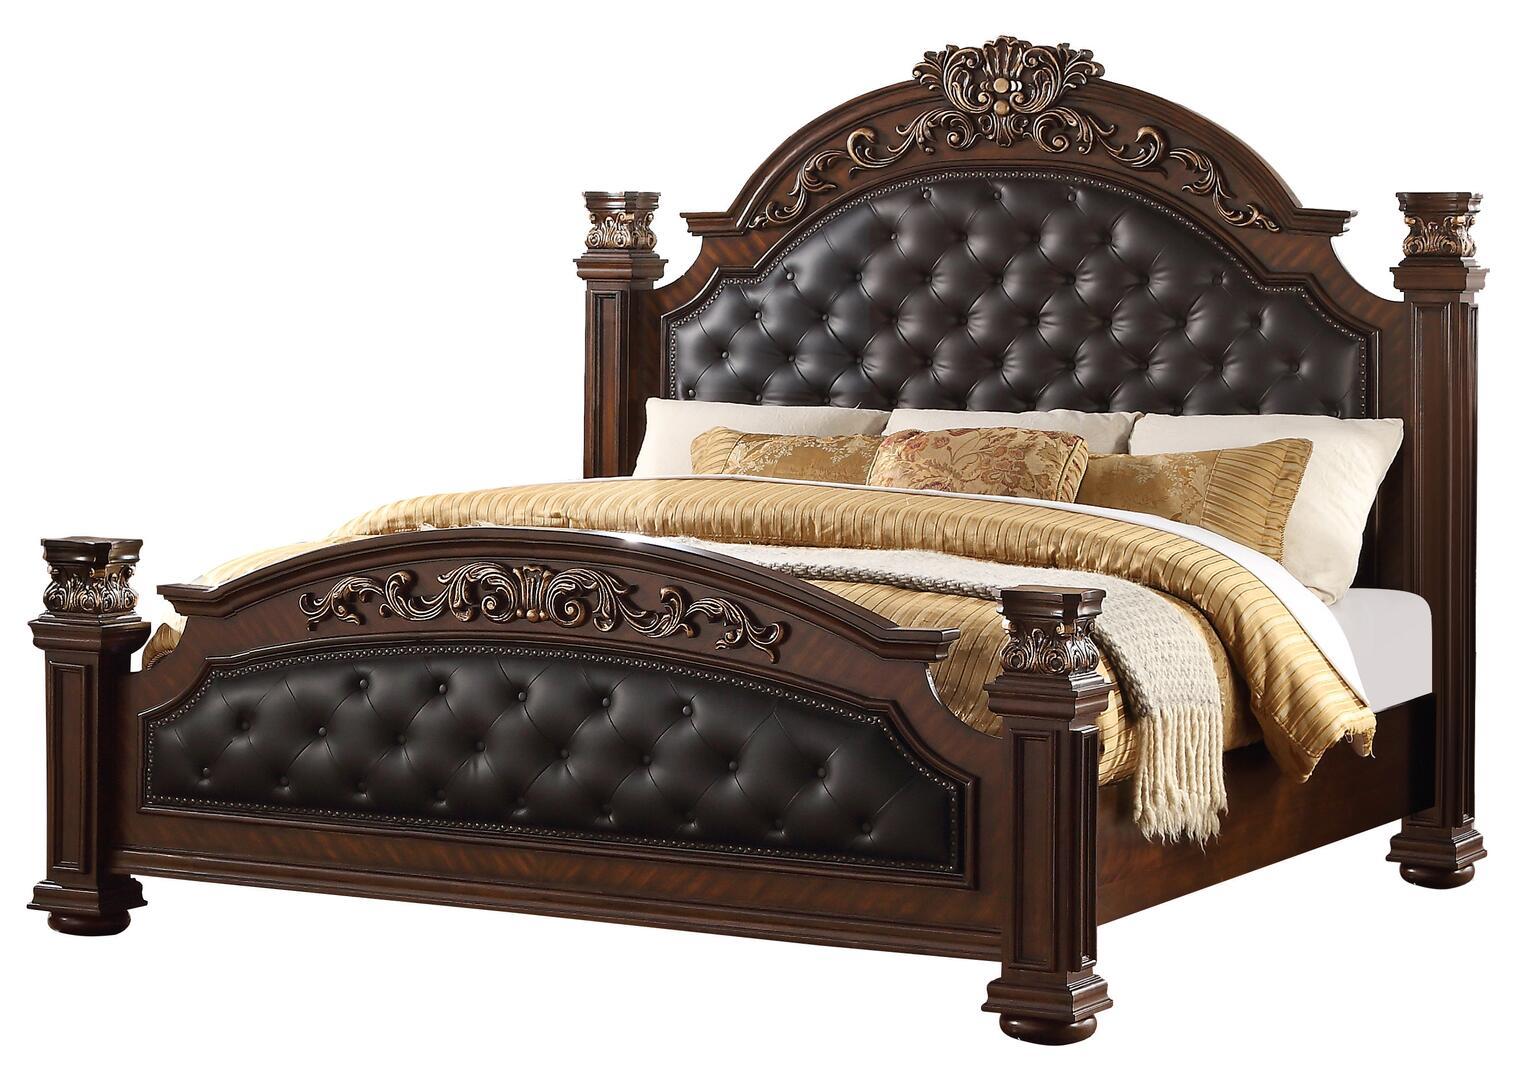 

    
Cherry Finish Wood King Bedroom Set 6Pcs w/Chest Traditional Cosmos Furniture Aspen
